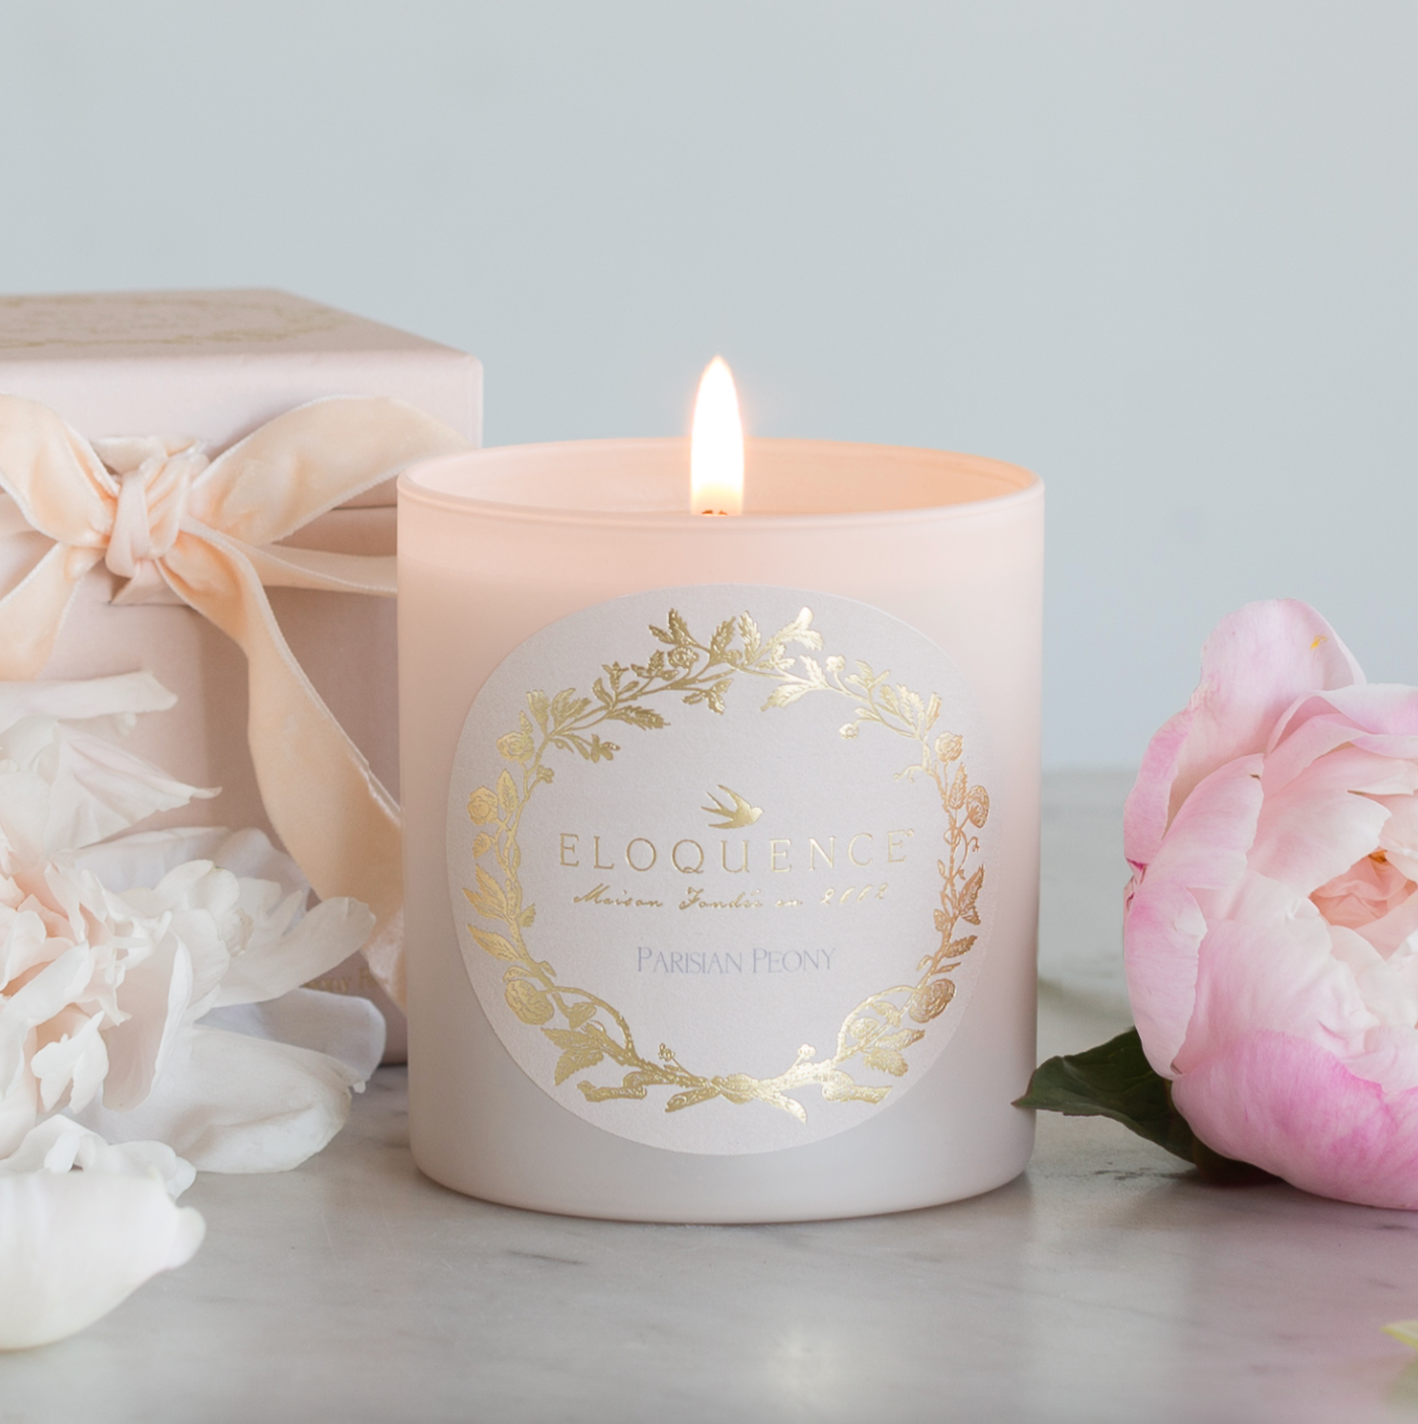 Eloquence Candle Parisian Peony